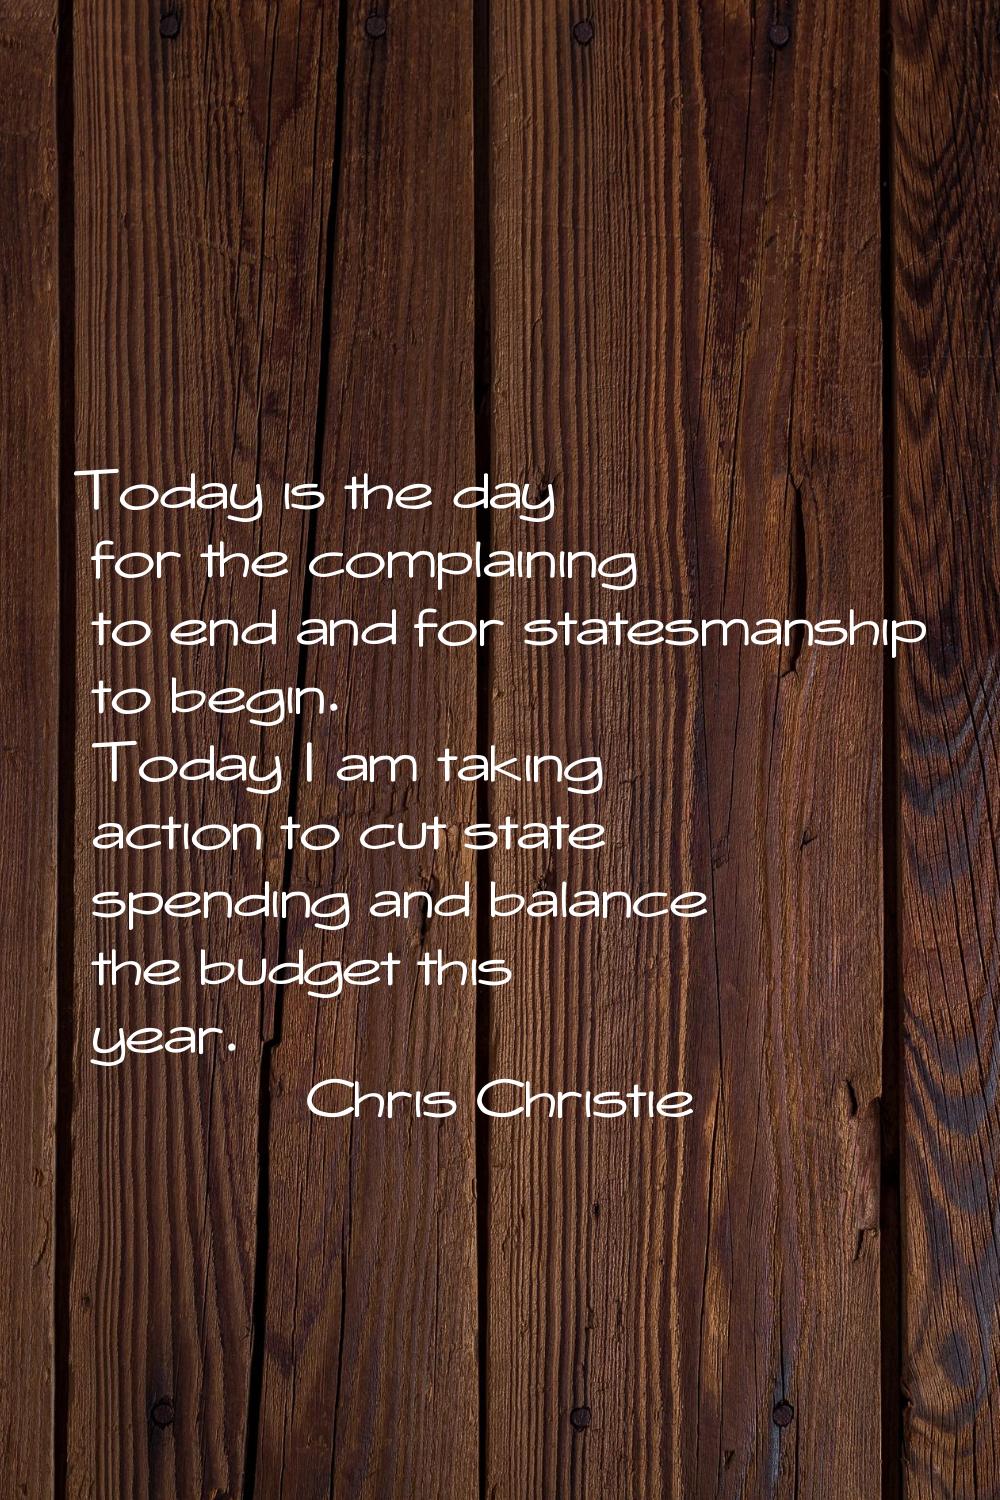 Today is the day for the complaining to end and for statesmanship to begin. Today I am taking actio